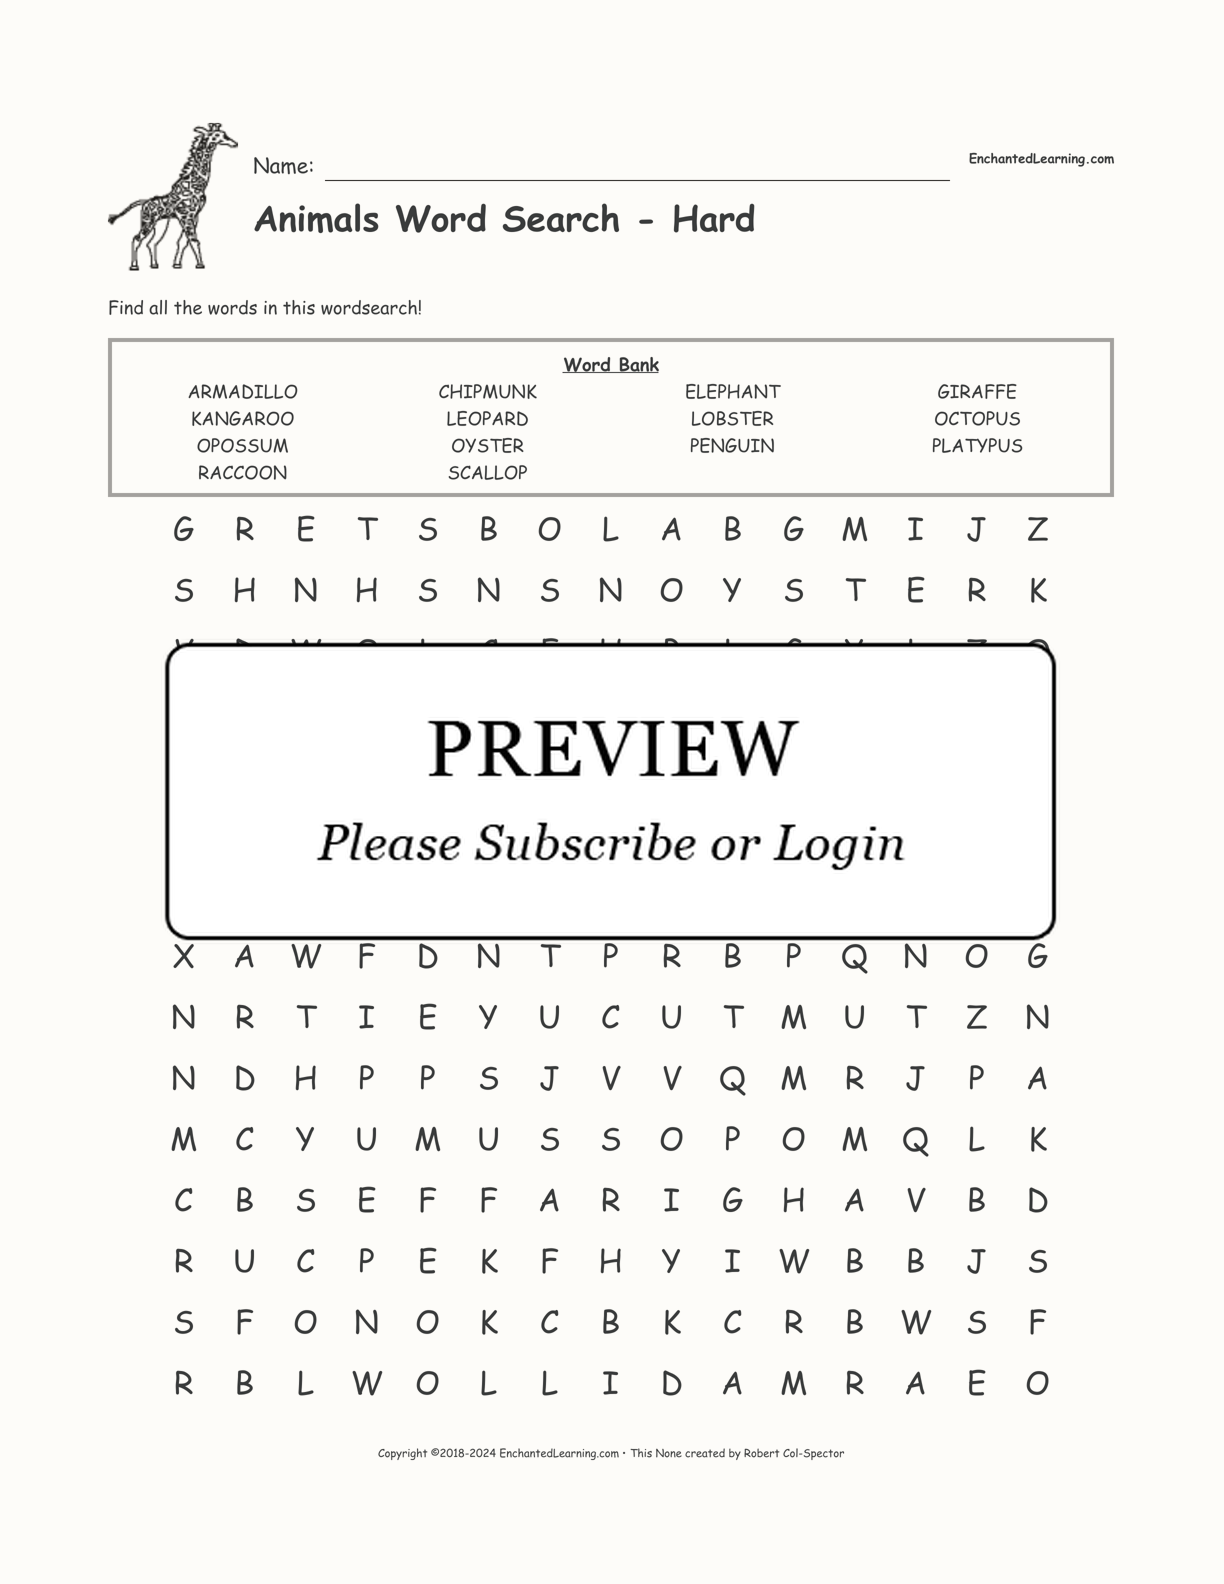 Animals Word Search - Hard interactive worksheet page 1